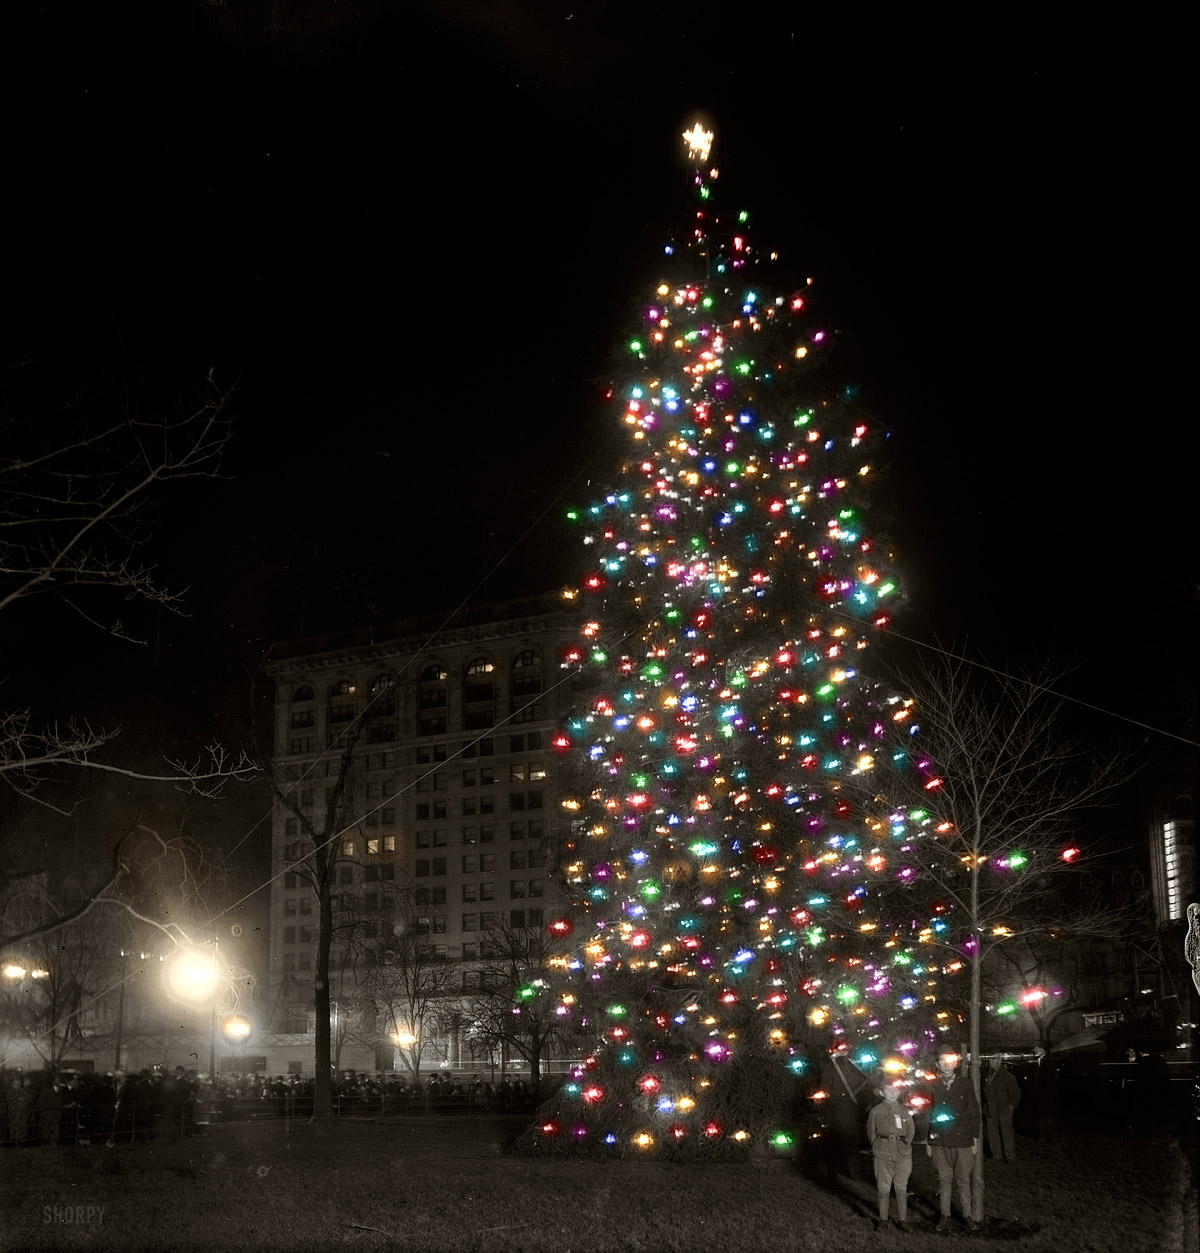 New York, December 1913. "Christmas tree, Madison Square." 8x10 glass negative, G.G. Bain Collection. View full size. Happy holidays from Shorpy!